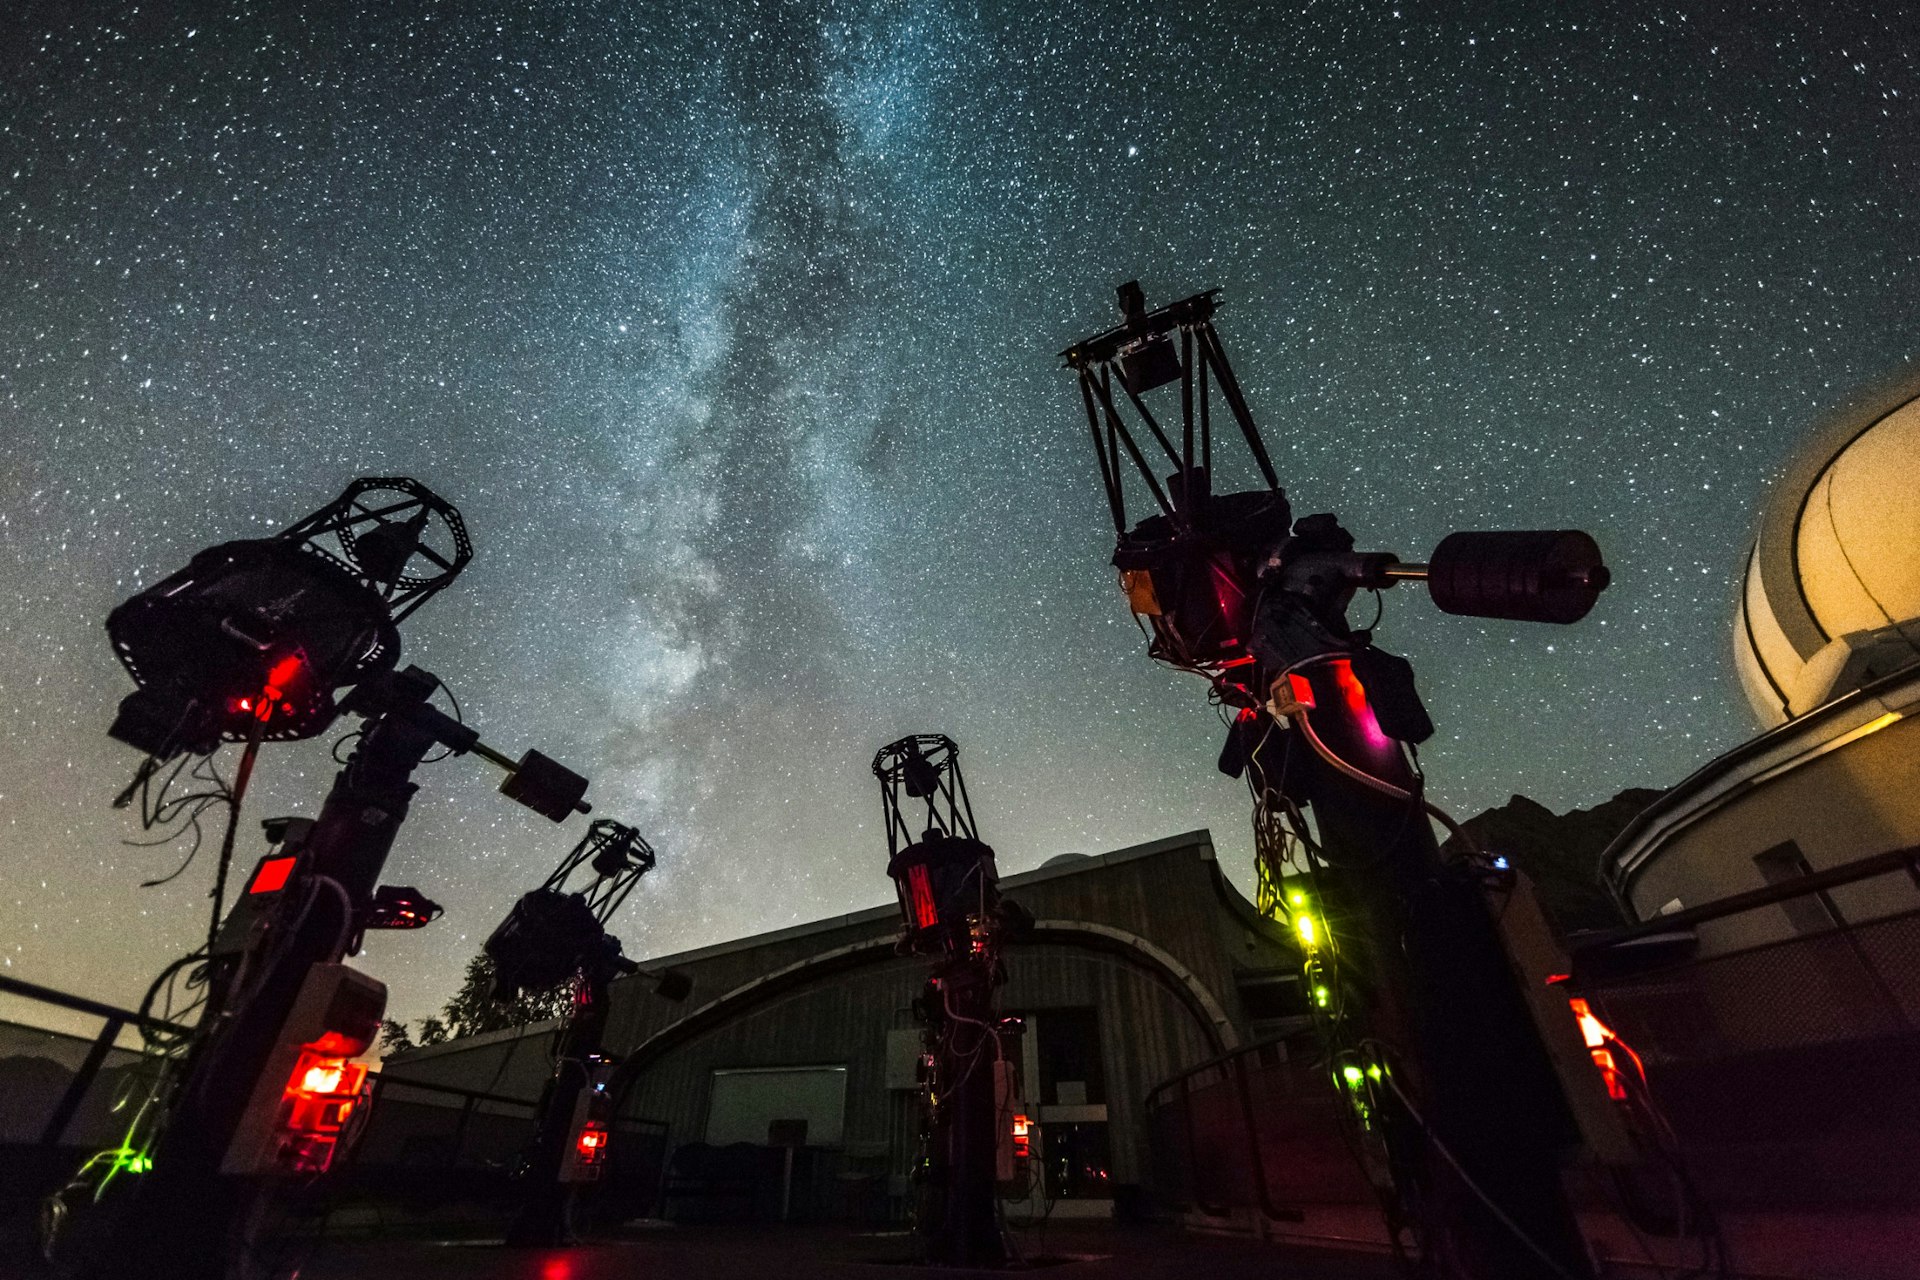 Telescopes in front of a star-filled sky